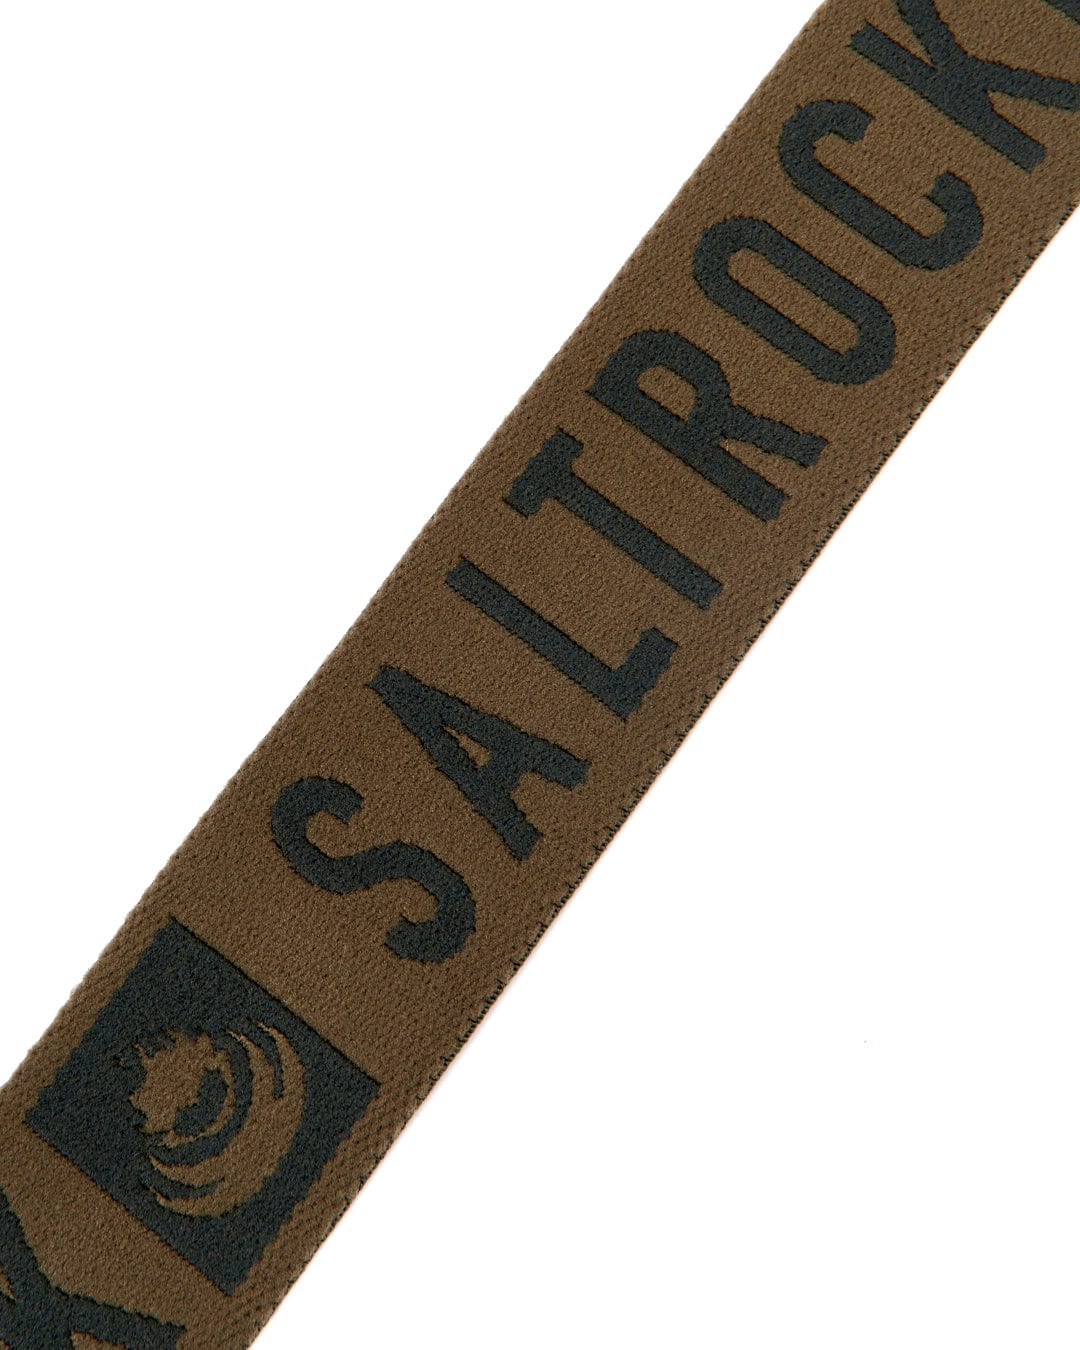 A green stretch belt with embroidered Saltrock branding on it.